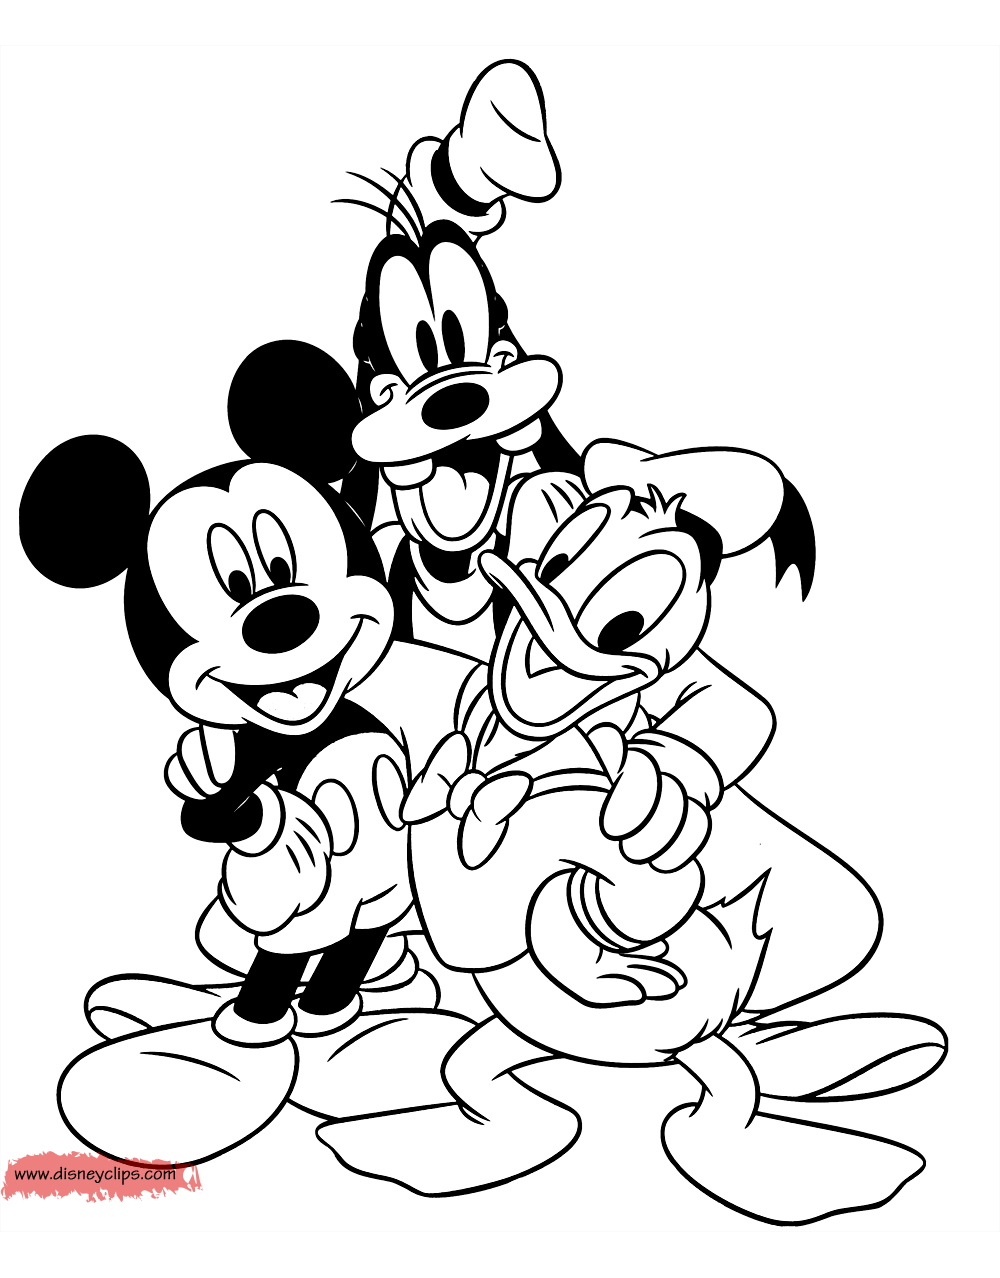 mickey mouse friends coloring pages disney coloring book mickey mouse halloween printable coloring pages mickey mouse clubhouse printable coloring pages